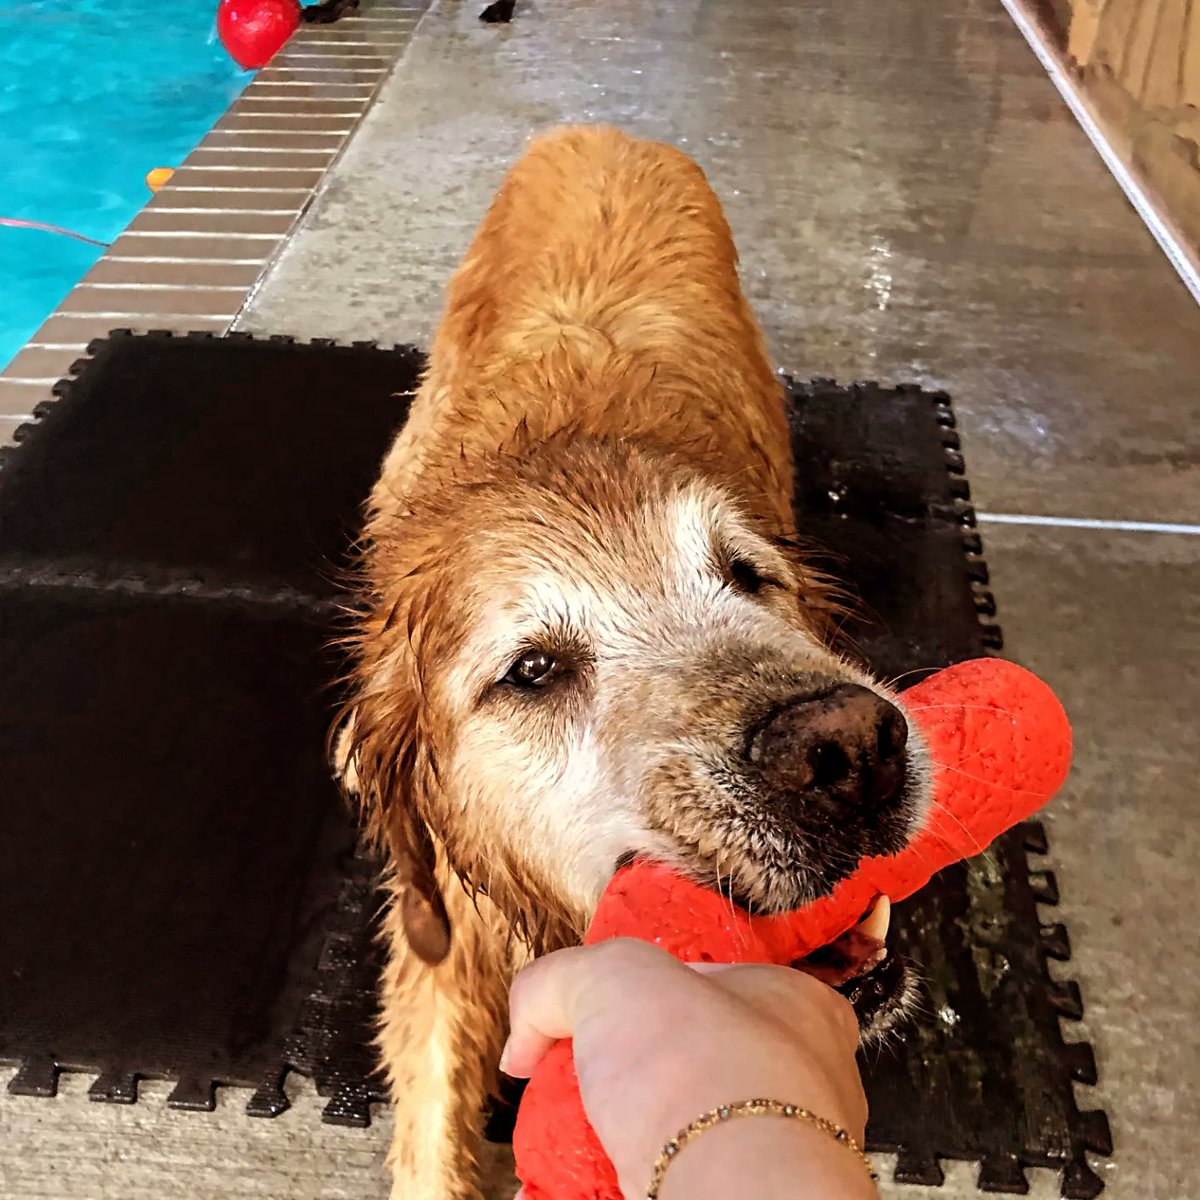 Our @TrentonThunder season starts in less than 2 weeks, so I'm taking a short vacation @GreenLeafPups. I made some new frens and of course went swimming. I'm going to practice retrieving bats tomorrow and then get groomed before Dash and I go home.